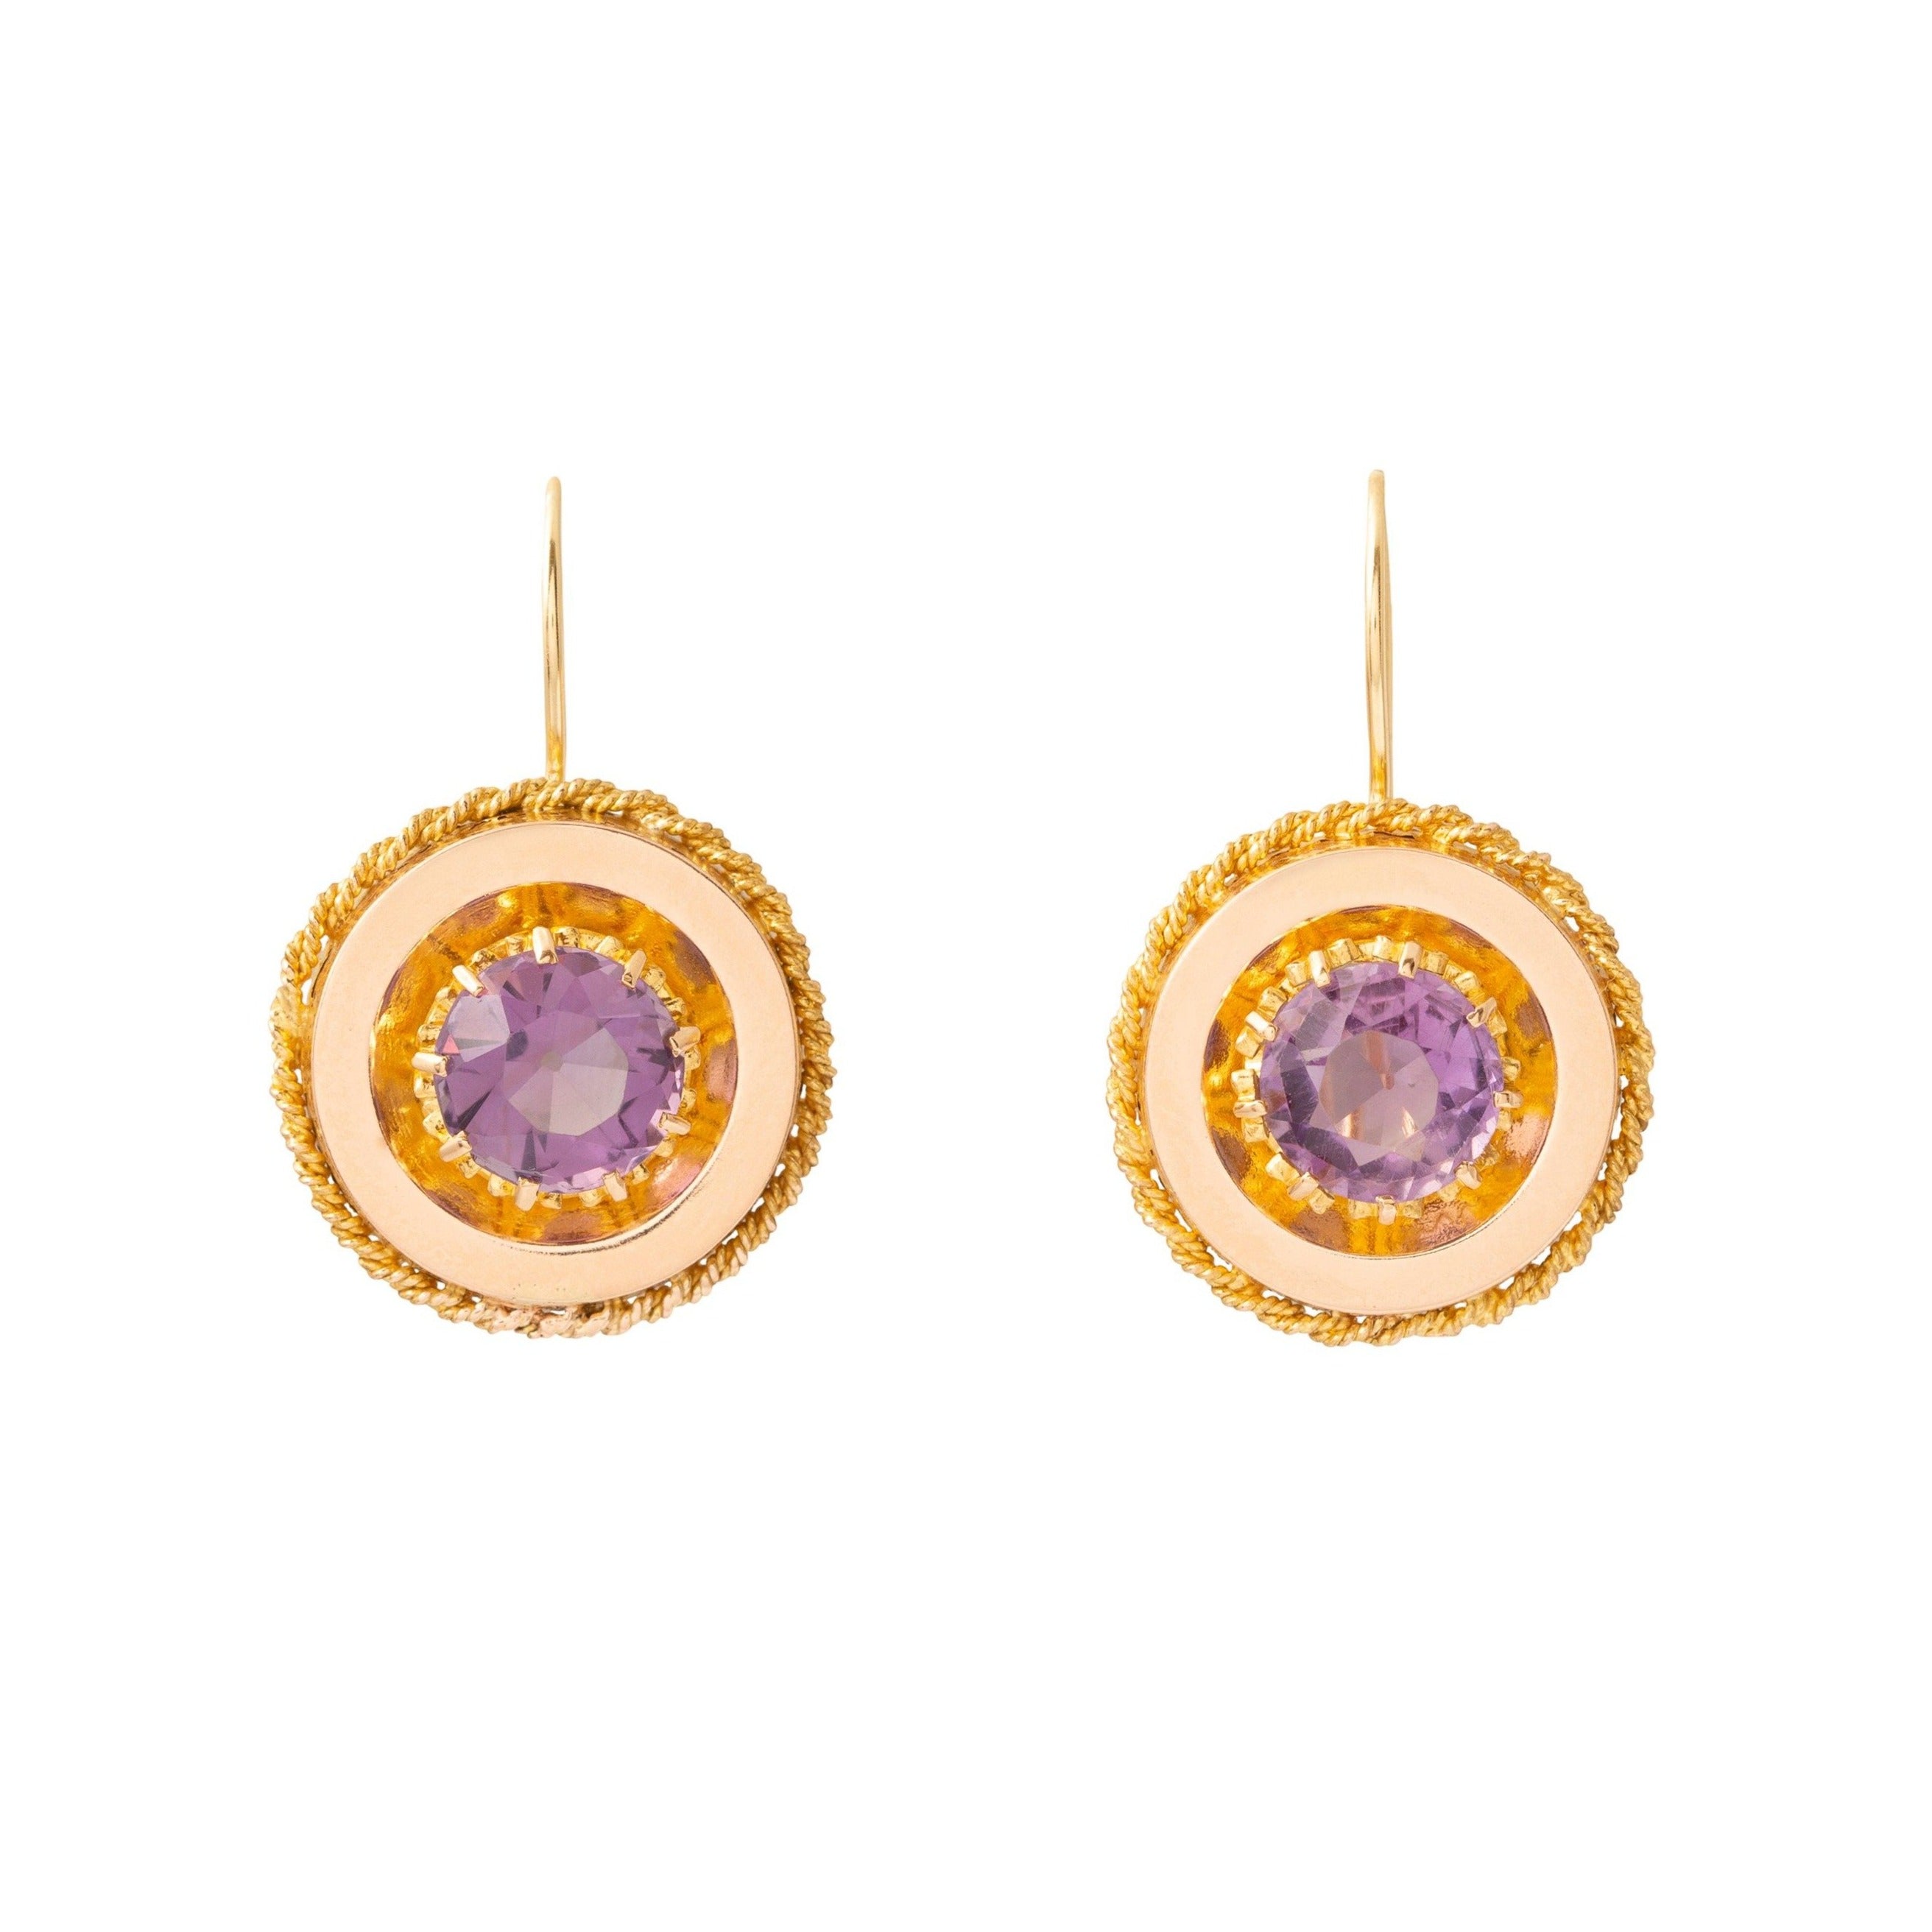 Victorian Amethyst and 18k Gold Drop Earrings